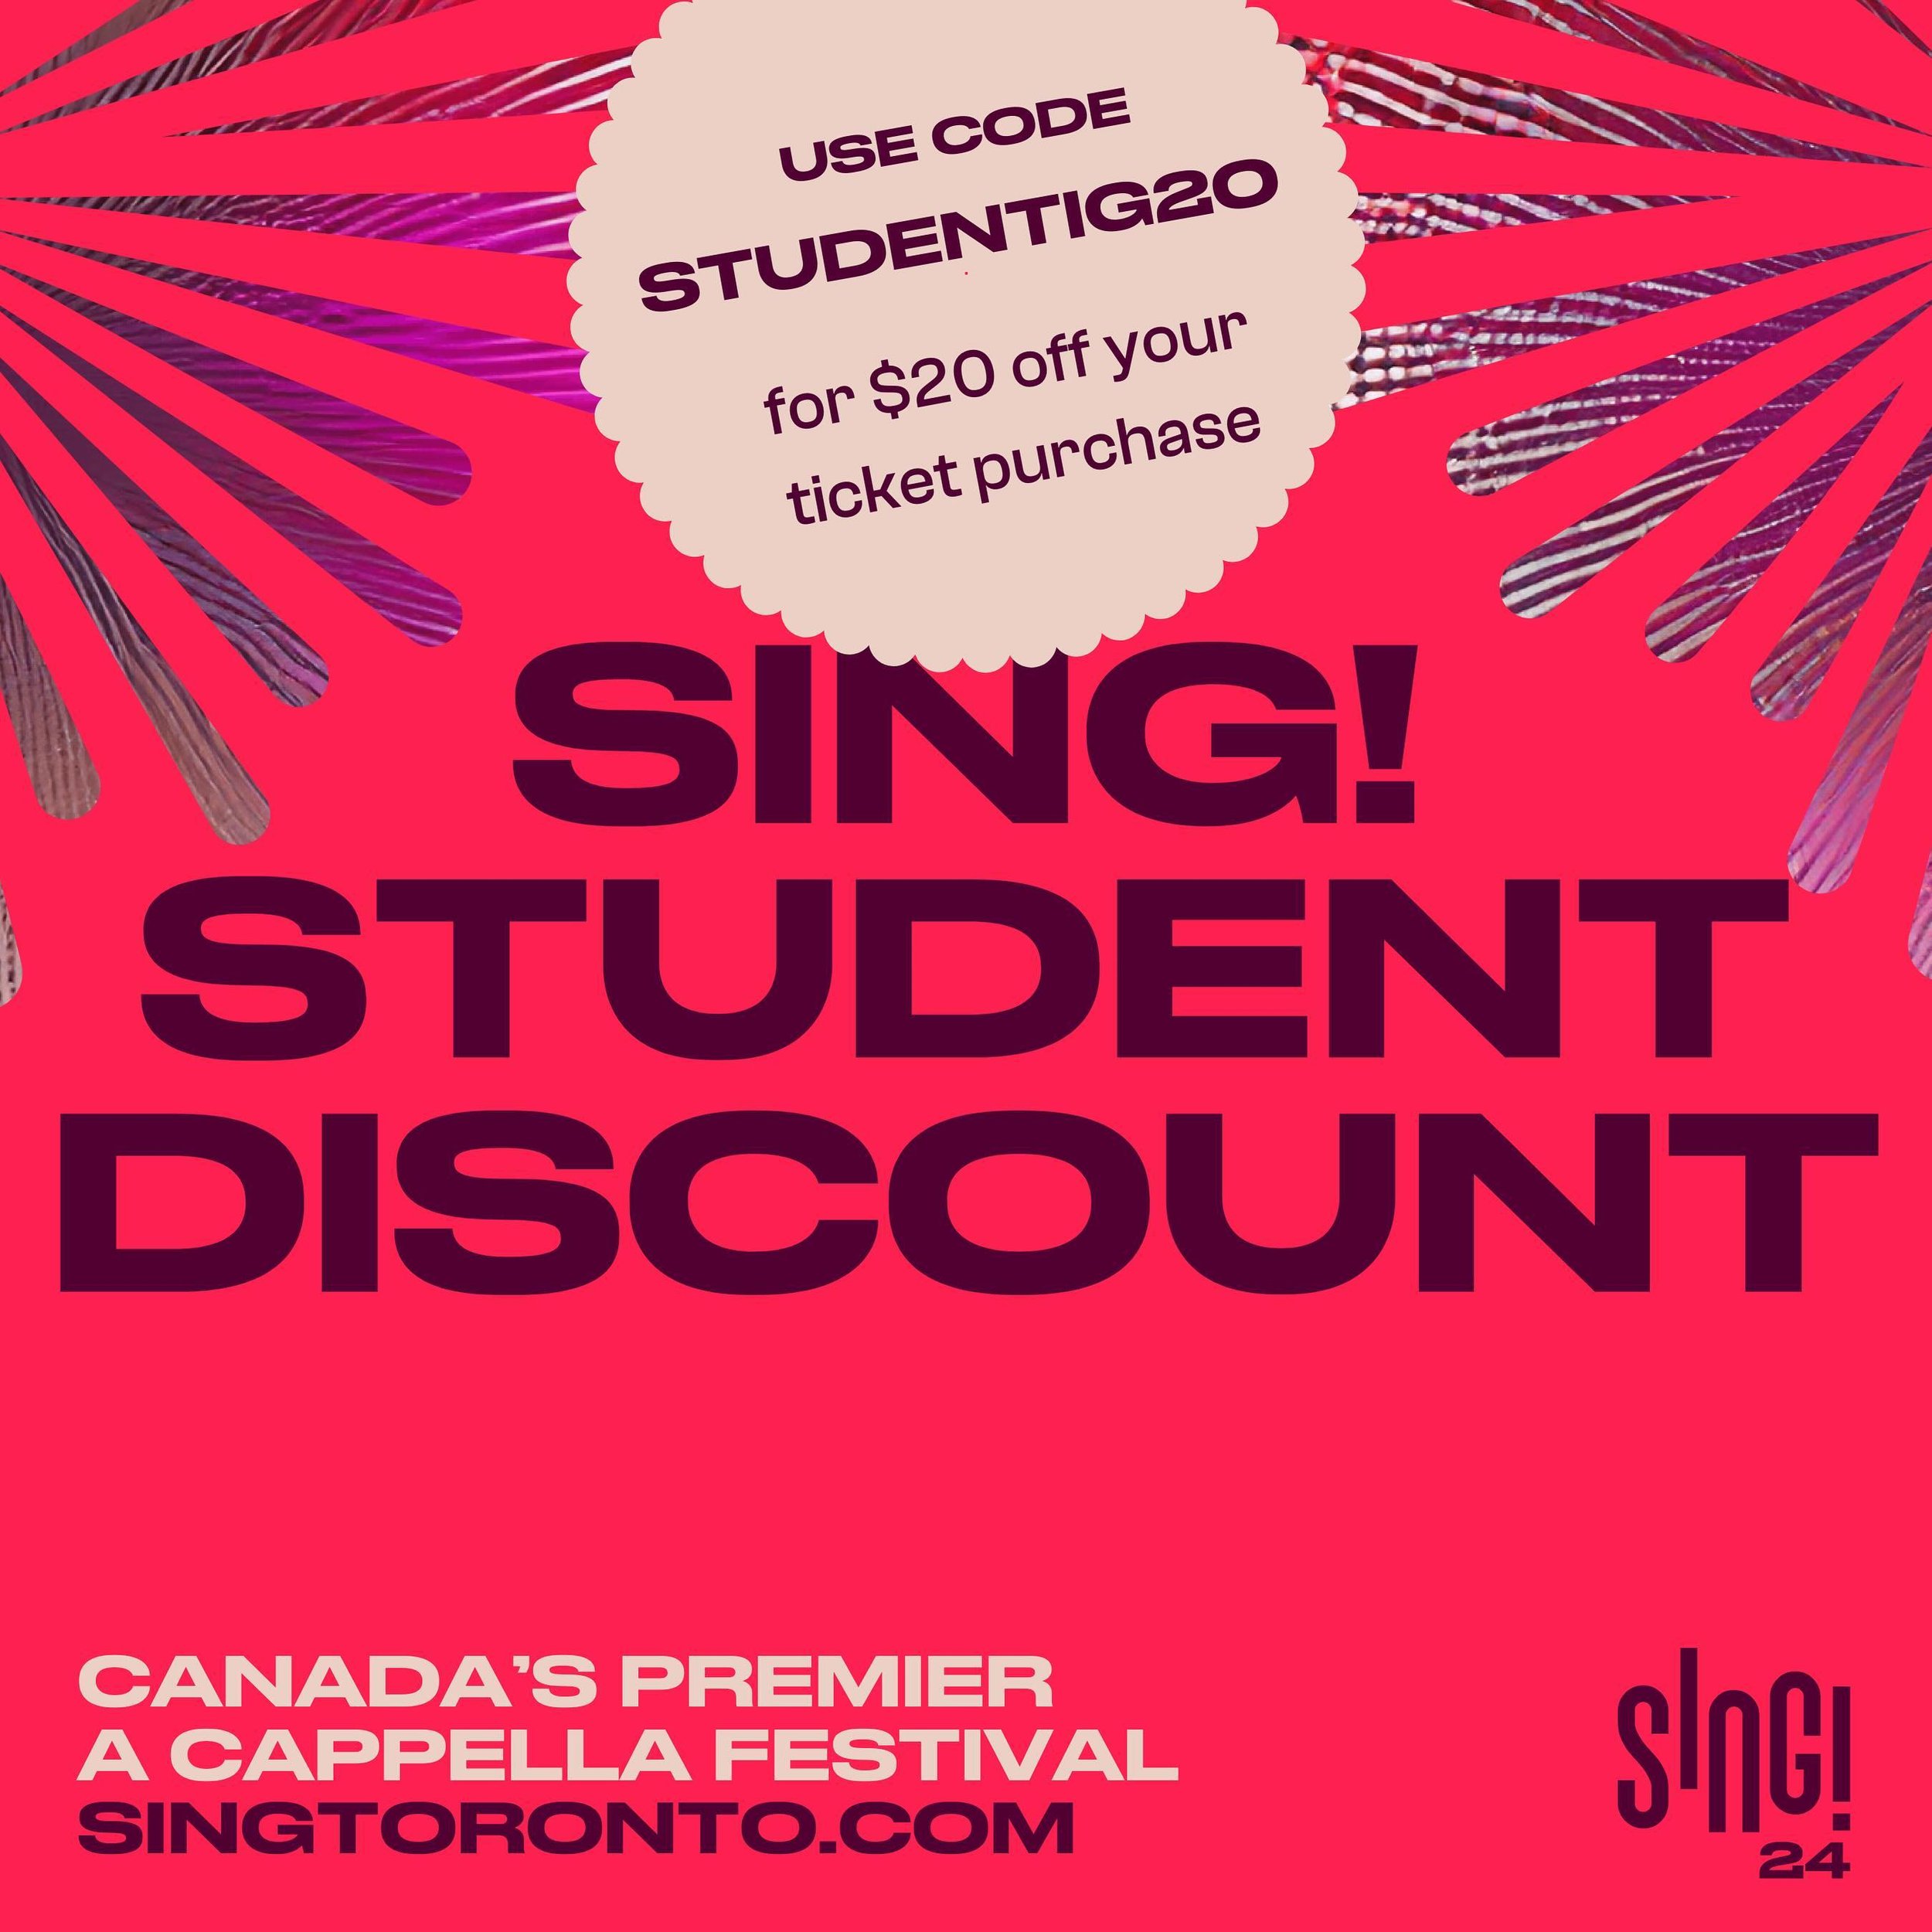 50% all of our ticketed concerts if you&rsquo;re a student! Just use the promo code STUDENTIG20 when you buy your tickets! Visit singtoronto.com for our full schedule of programming. See you there! #SING2024